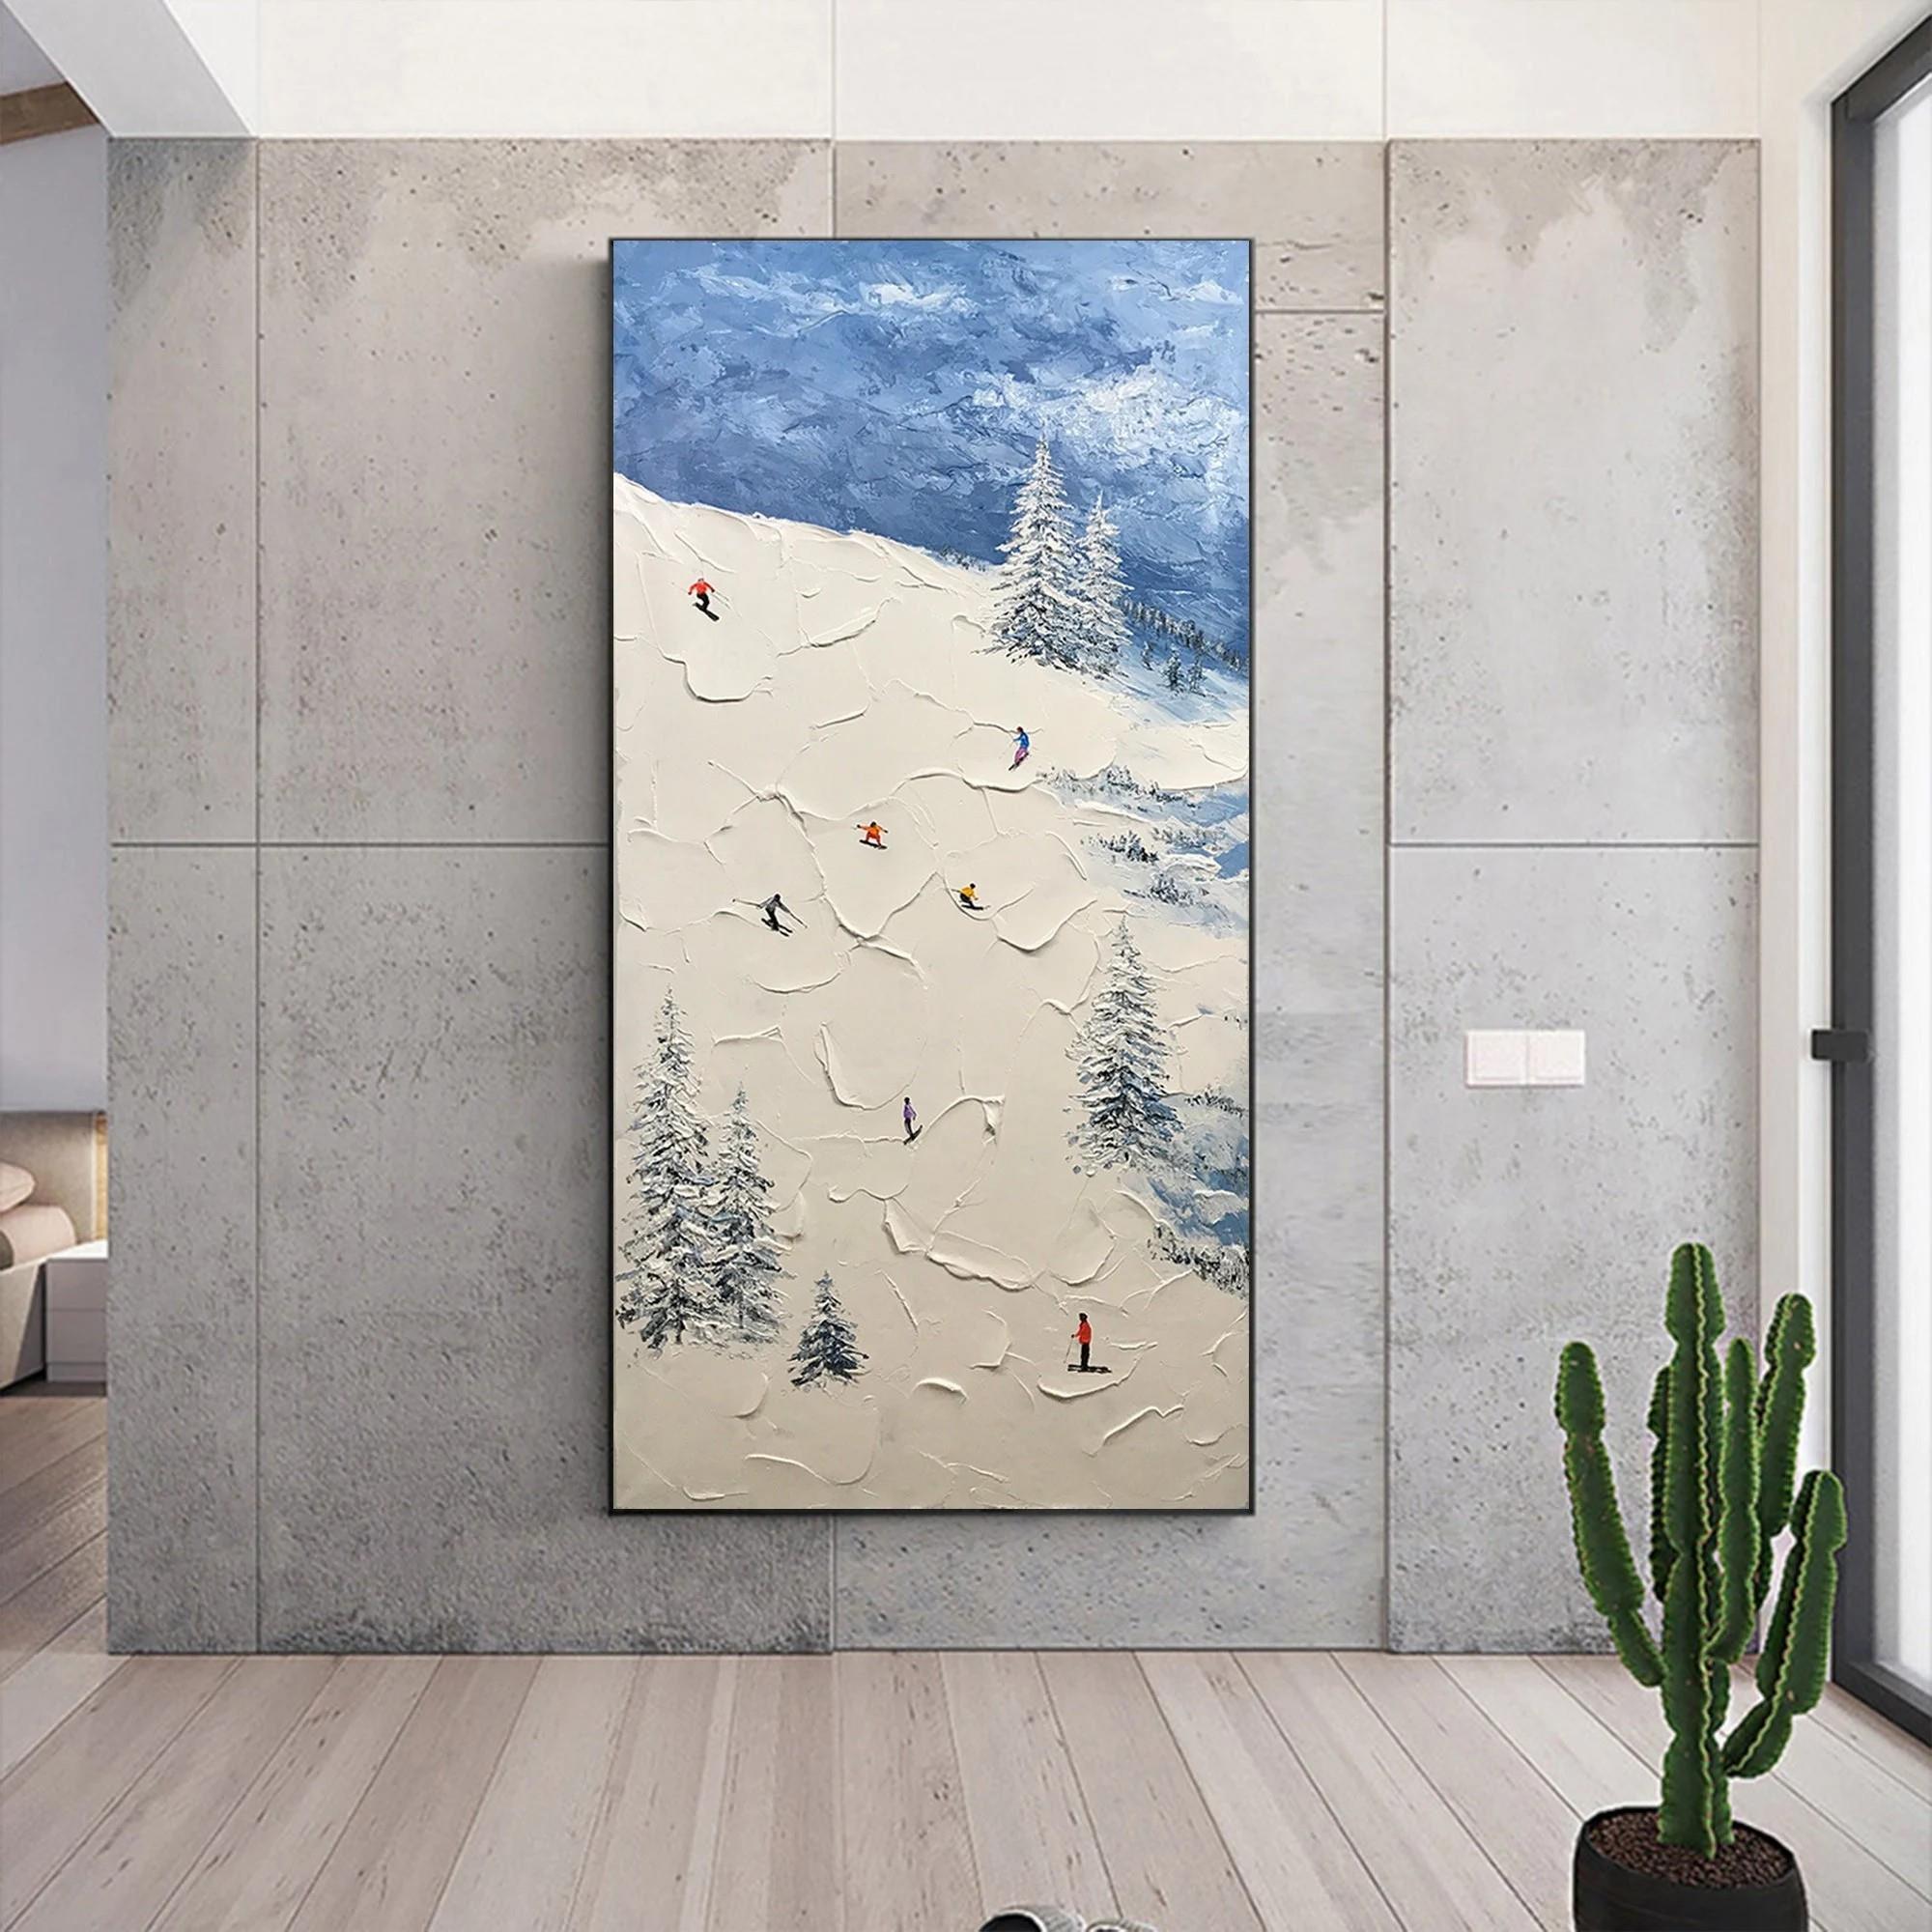 Skier on Snowy Mountain Wall Art Sport White Snow Skiing Room Decor by Knife 08 Oil Paintings